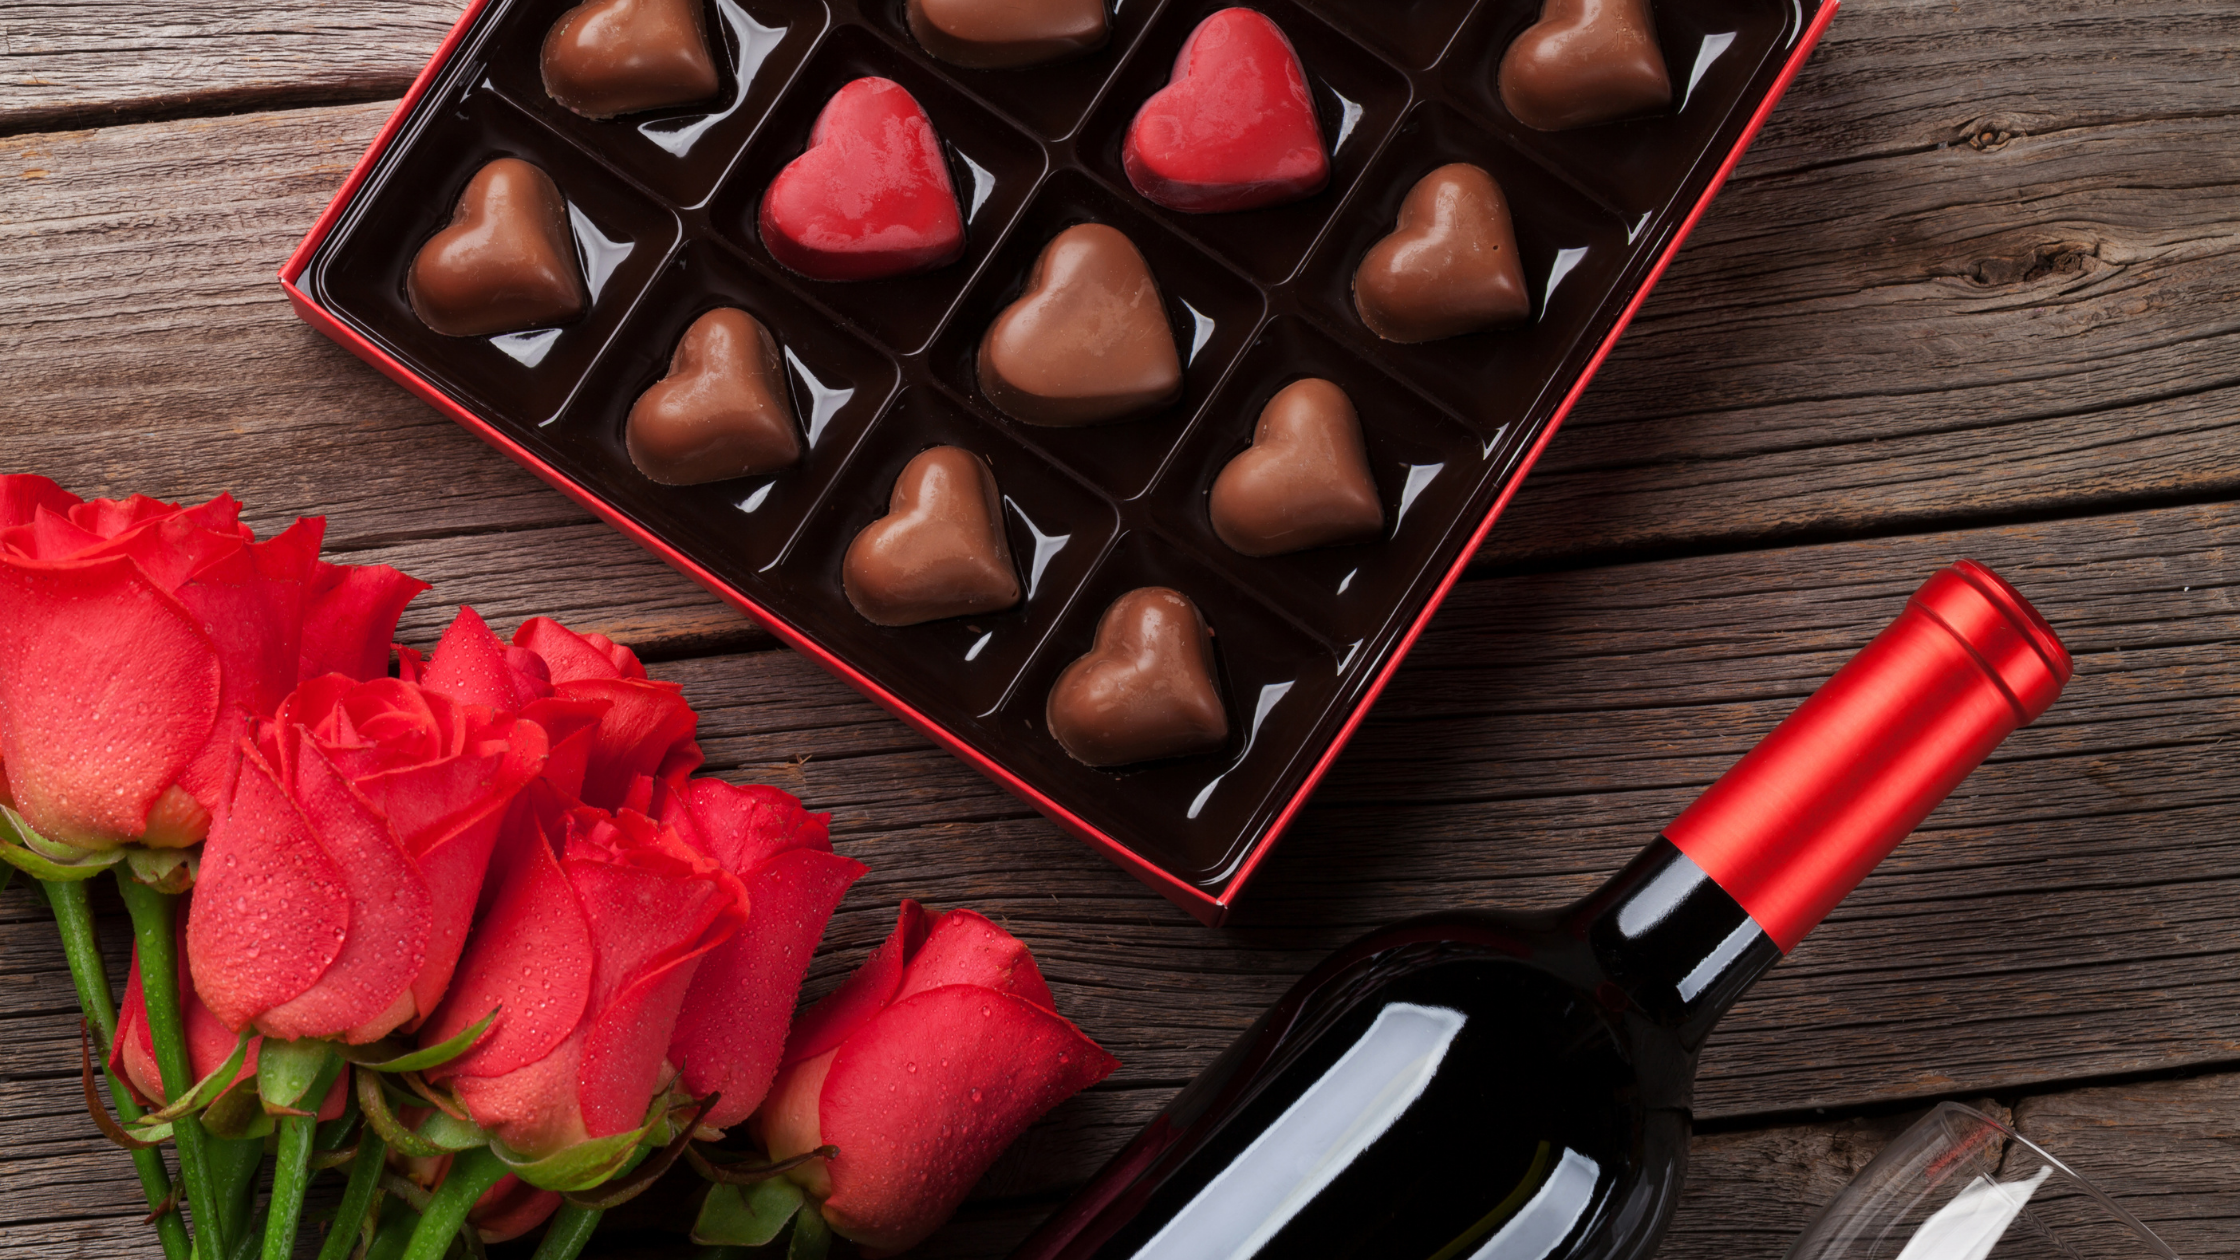 44 Cheap Valentine's Day Gifts - Romantic Gift Ideas Under $40